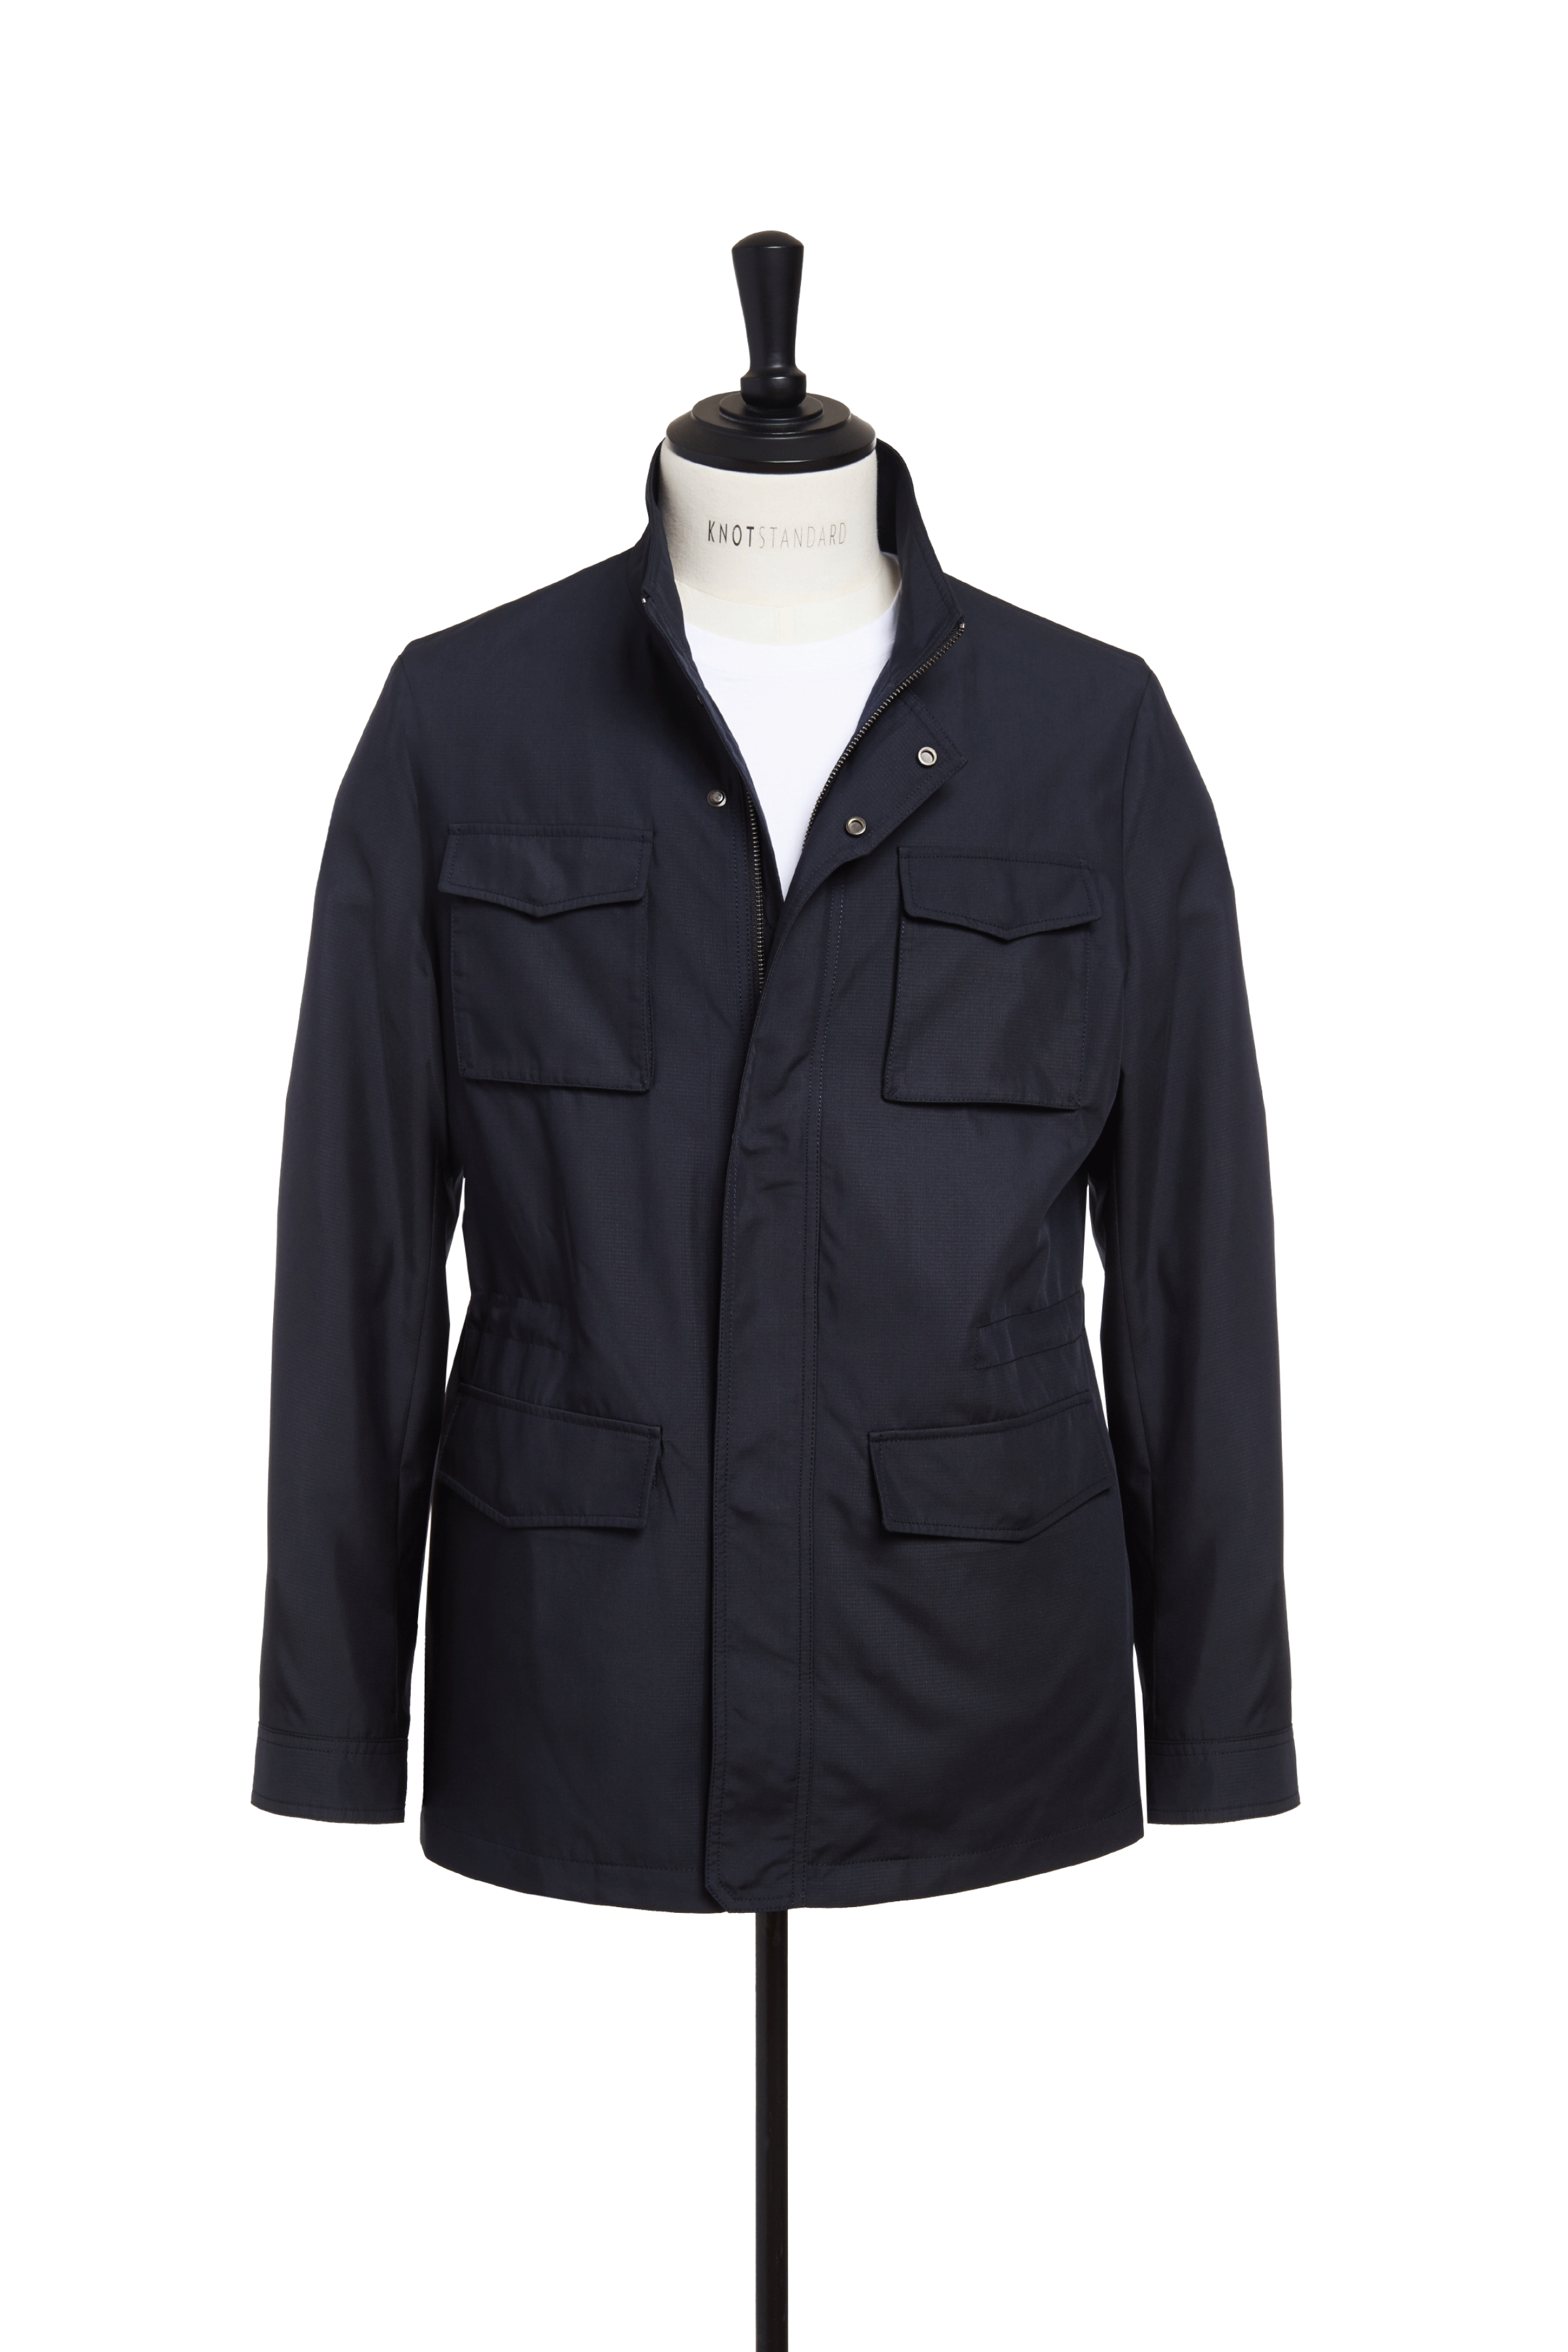 Knot Standard Black All Weather Performance Jacket by Knot Standard